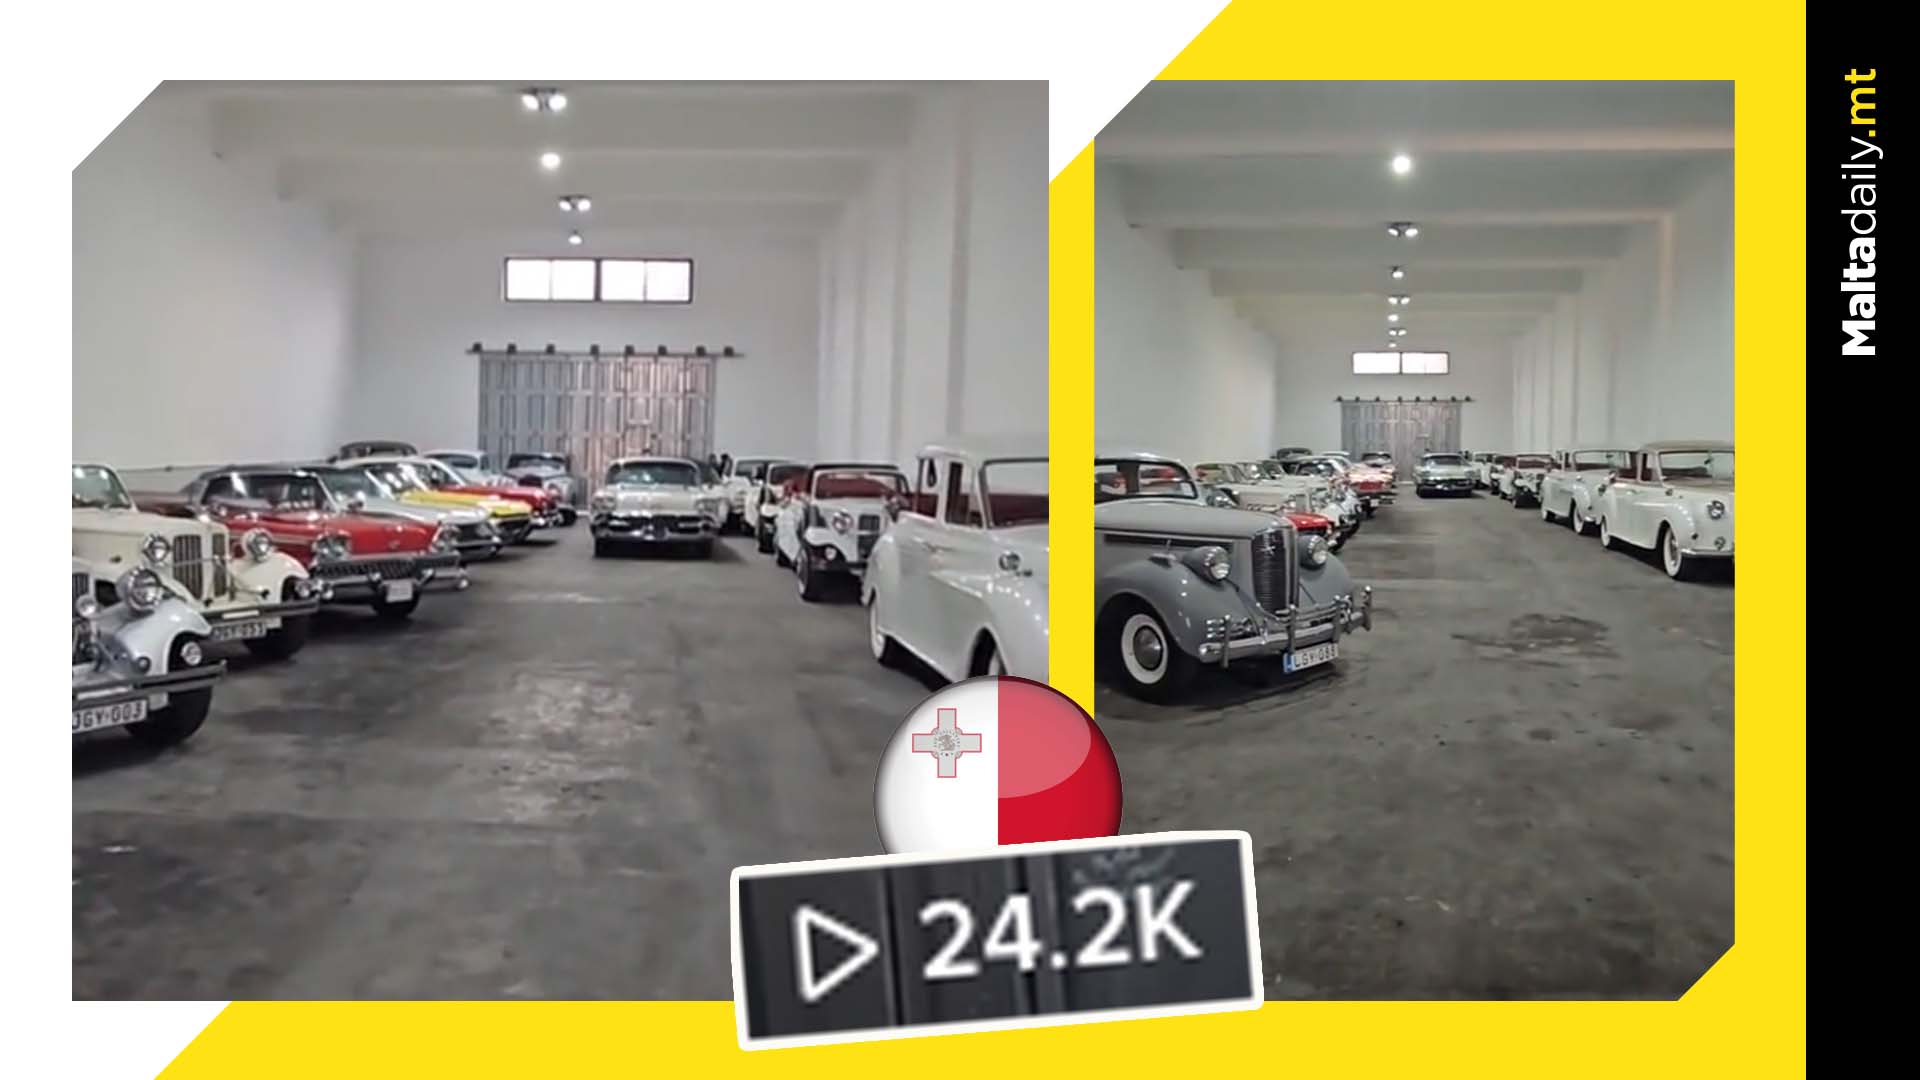 Maltese Goes TikTok Viral Showing Car Collection